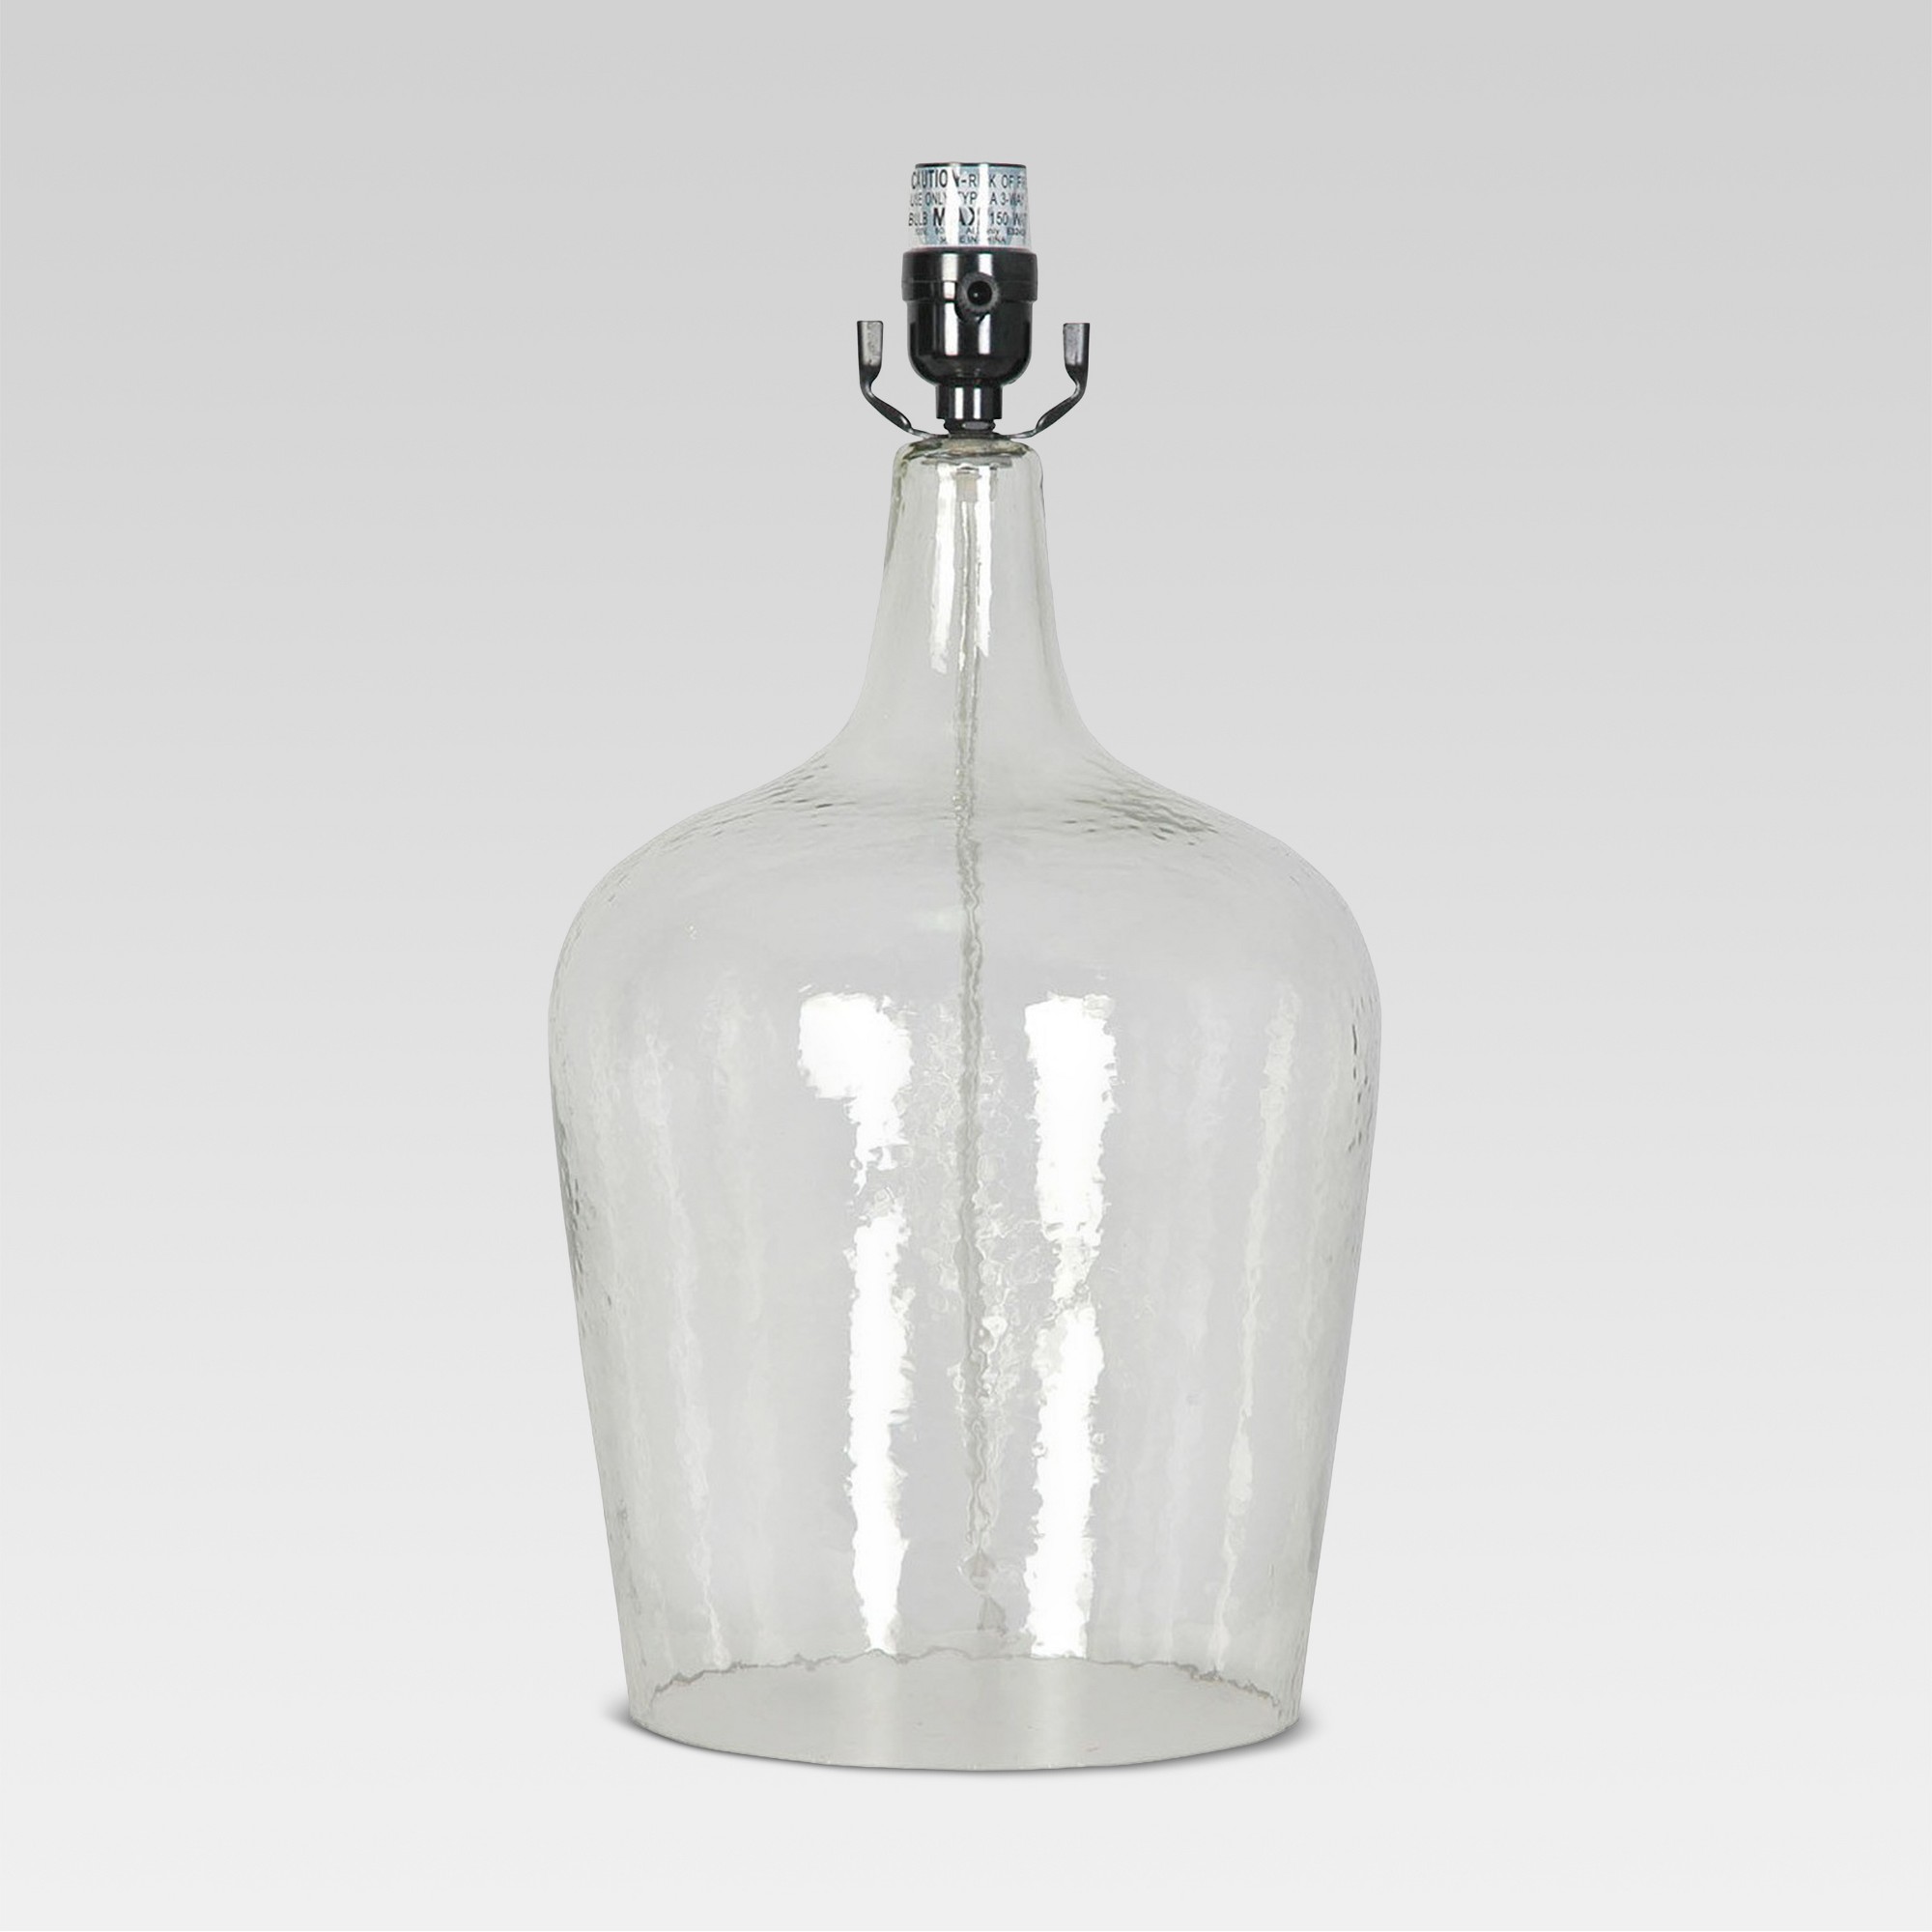 Artisan Glass Jug Large Lamp Base Clear Includes Energy Efficient Light Bulb - Threshold , Size: Lamp with Energy Efficient Light Bulb